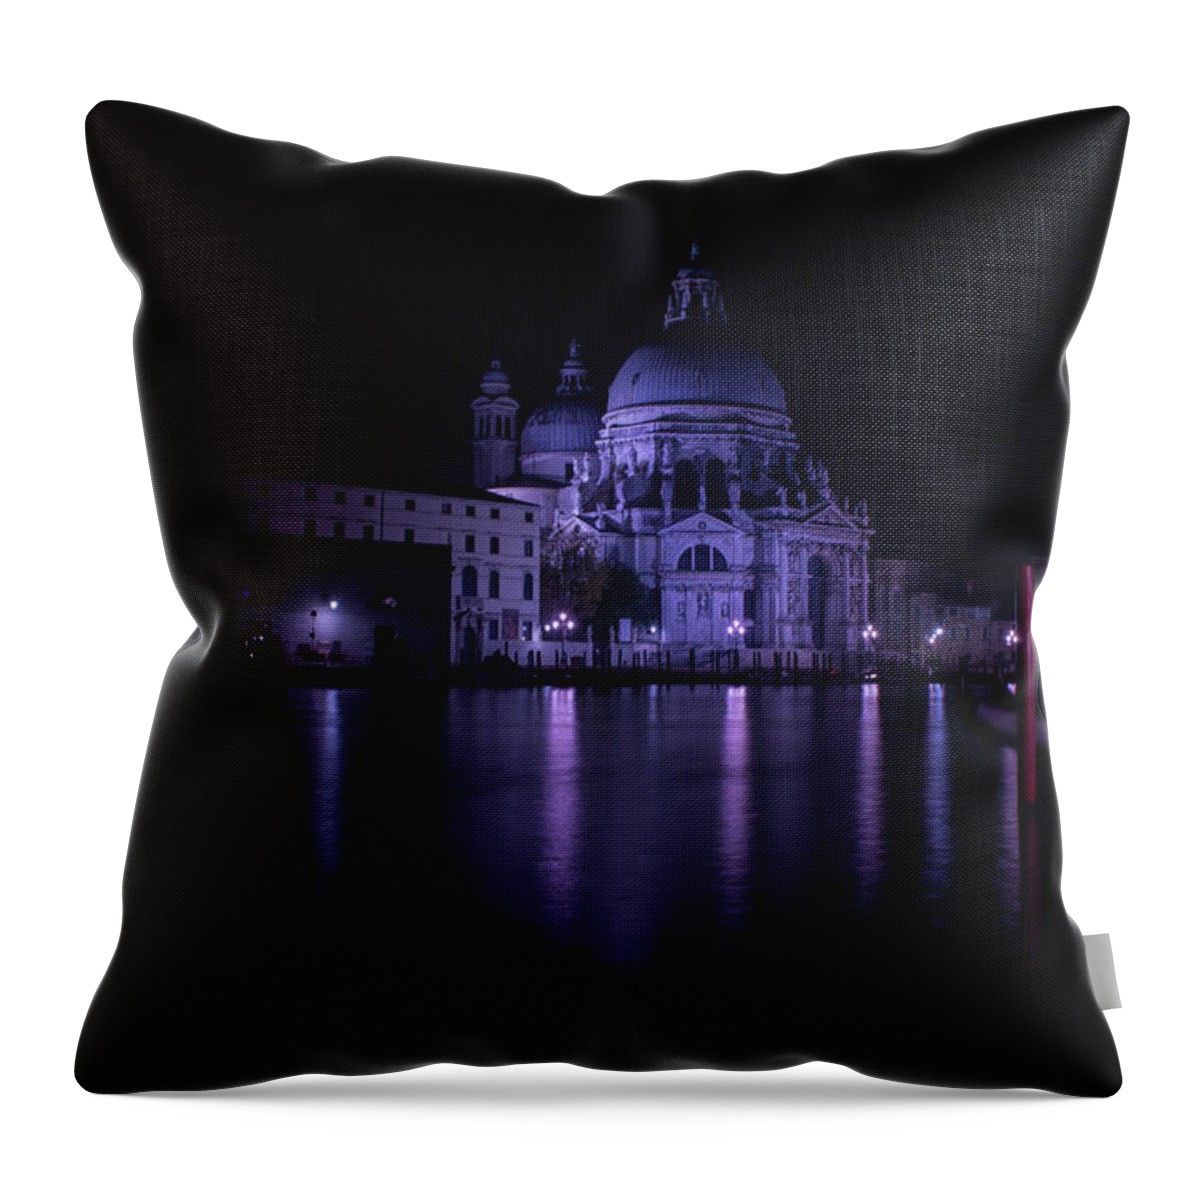 Venice Throw Pillow featuring the photograph Venice Church by Andrew Lalchan